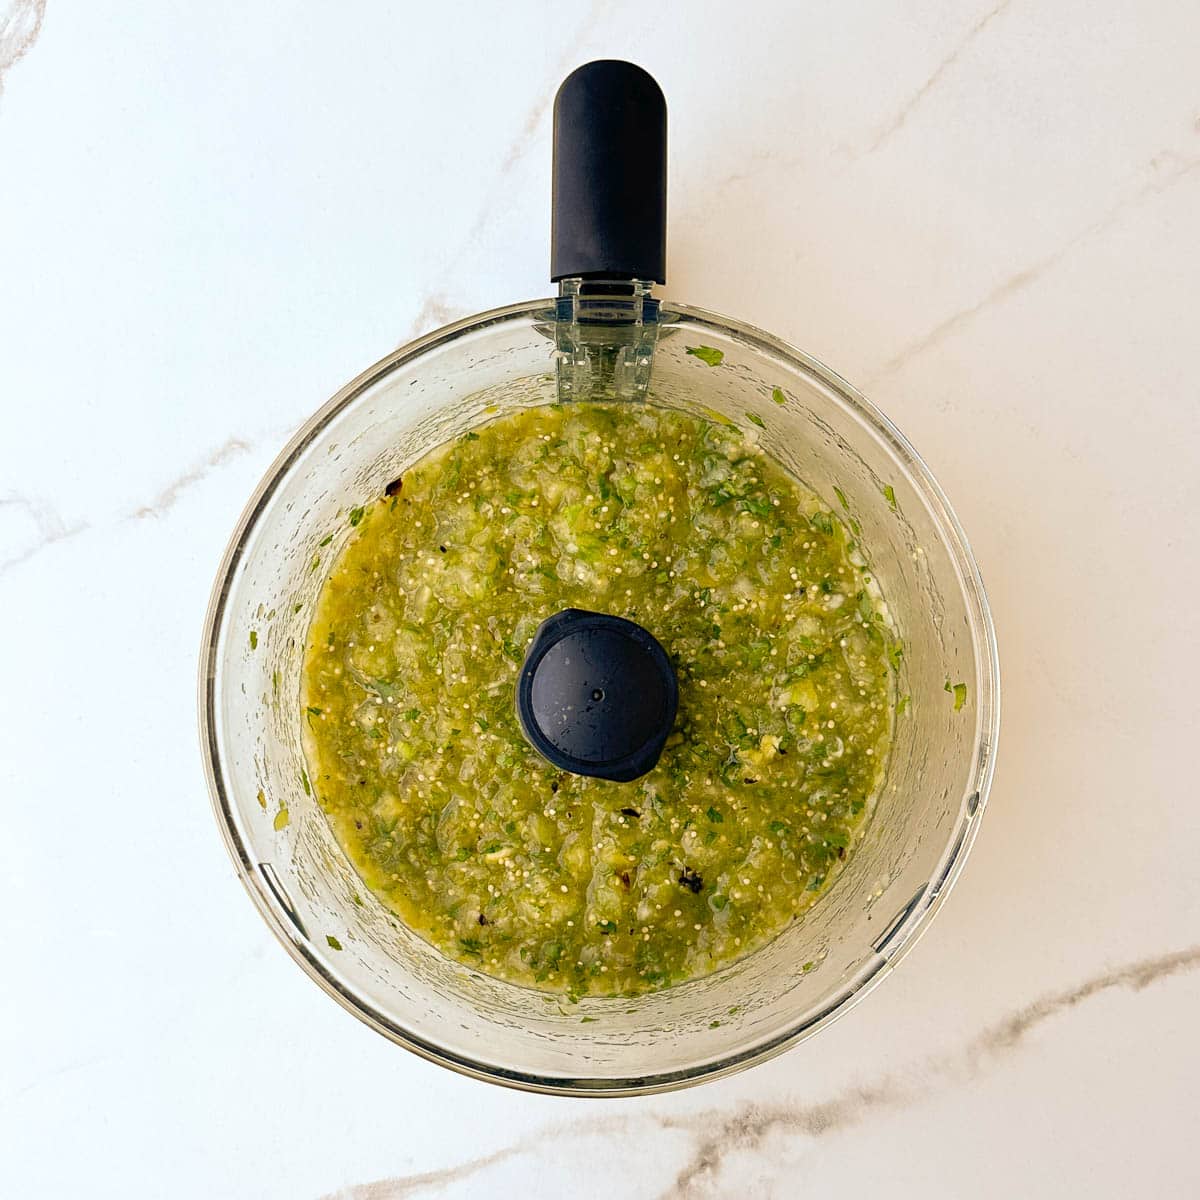 Pureed salsa verde, still a bit chunky, ready to serve, in a food processor.